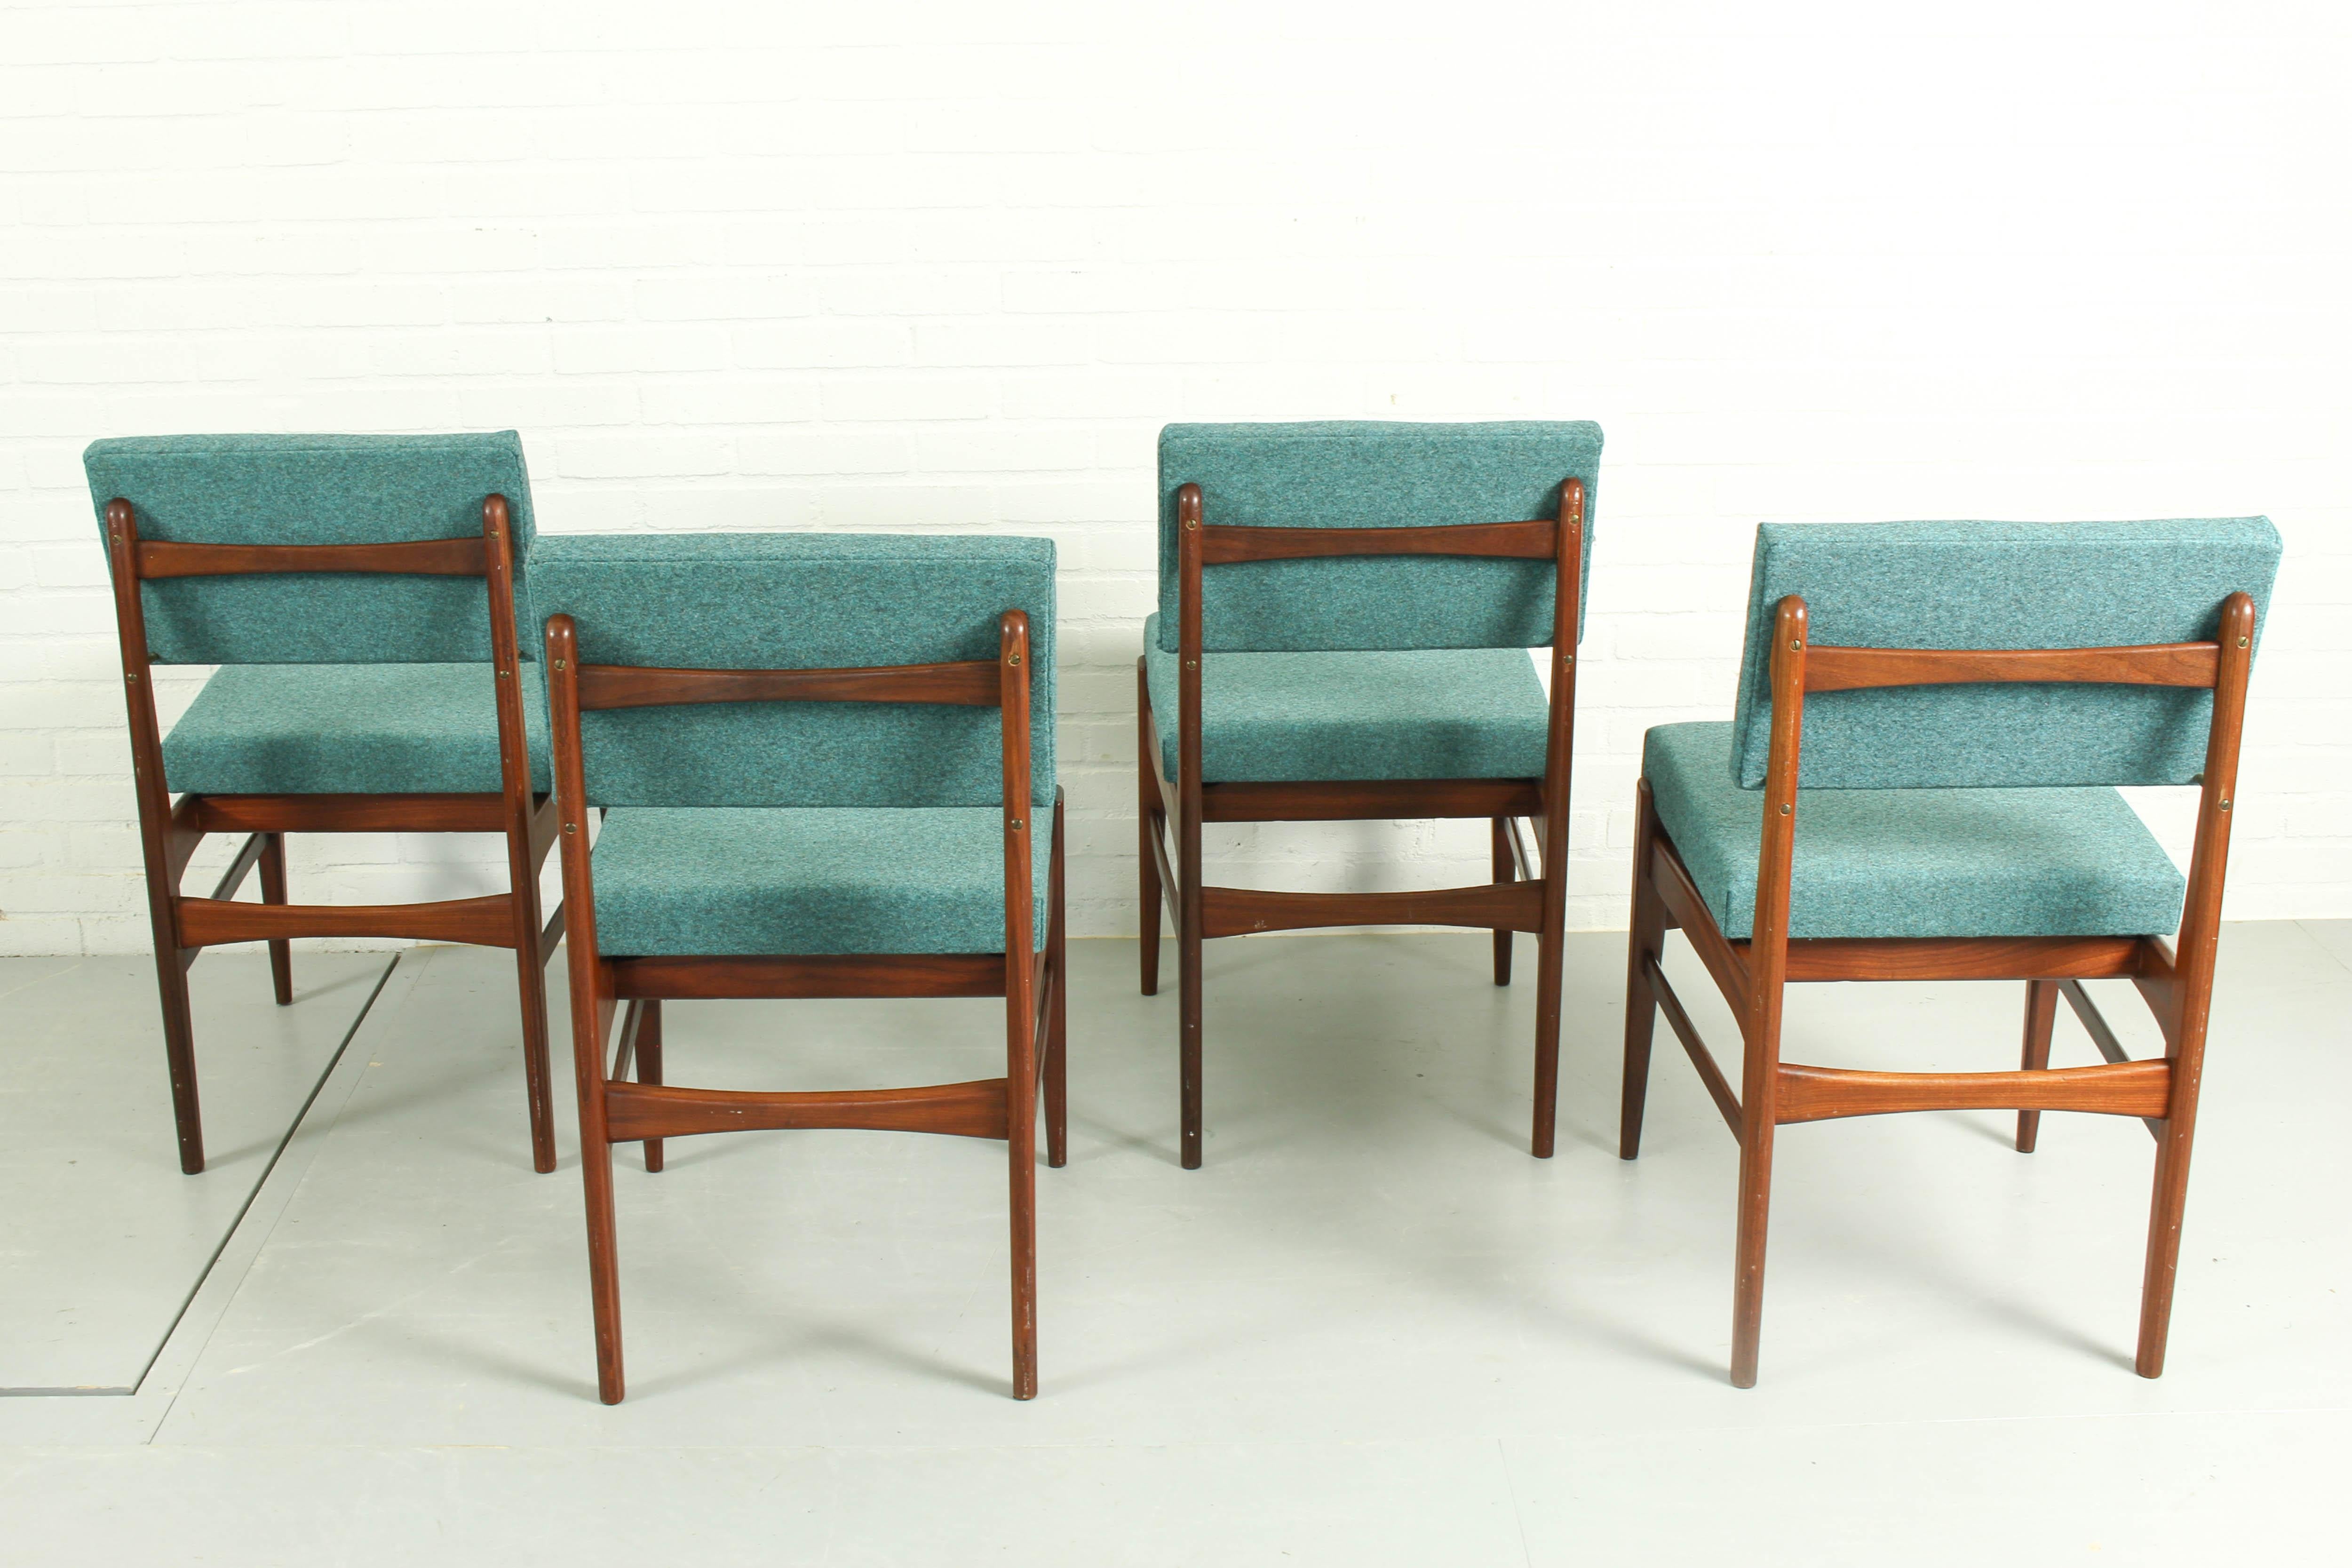 Dutch Dining chairs and Dining Table by Louis van Teeffelen for Wébé, The Netherlands  For Sale